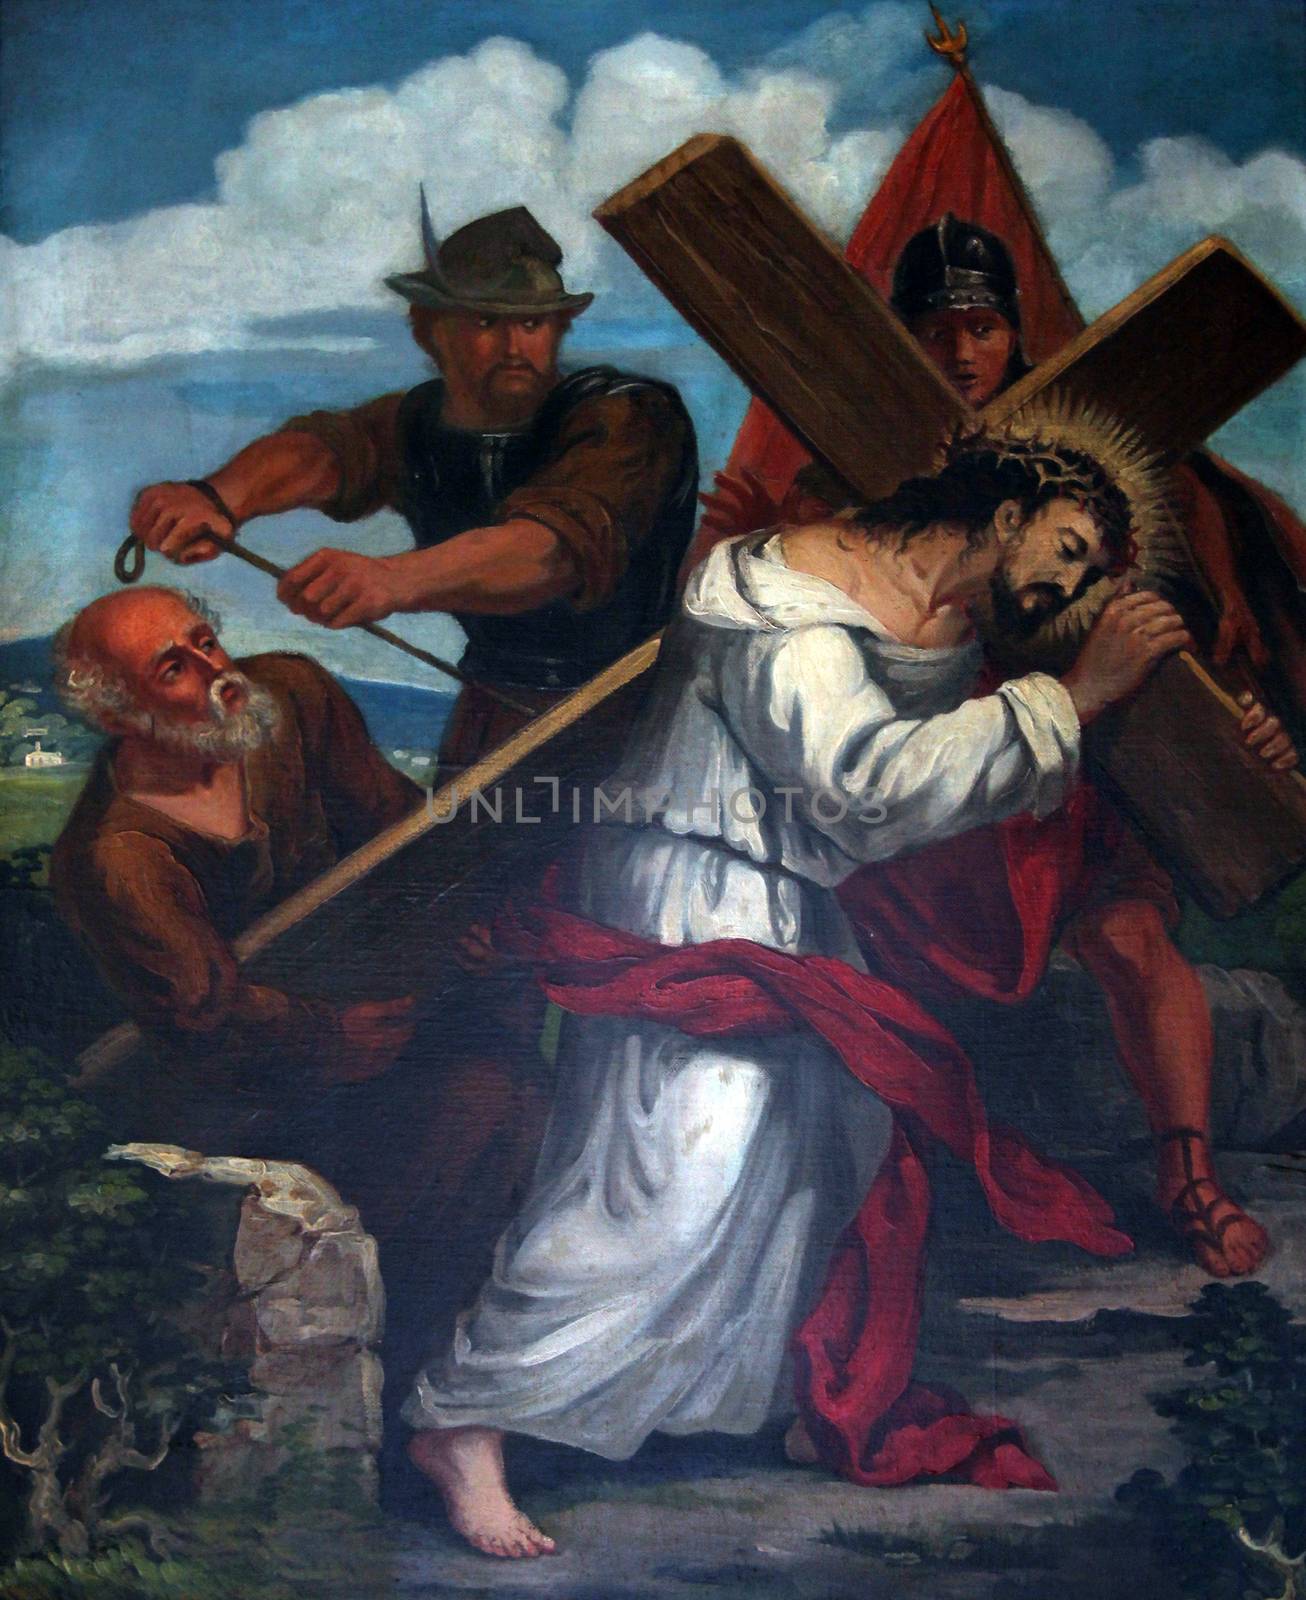 5th Stations of the Cross, Simon of Cyrene carries the cross, Sanctuary of St. Agatha in Schmerlenbach, Germany